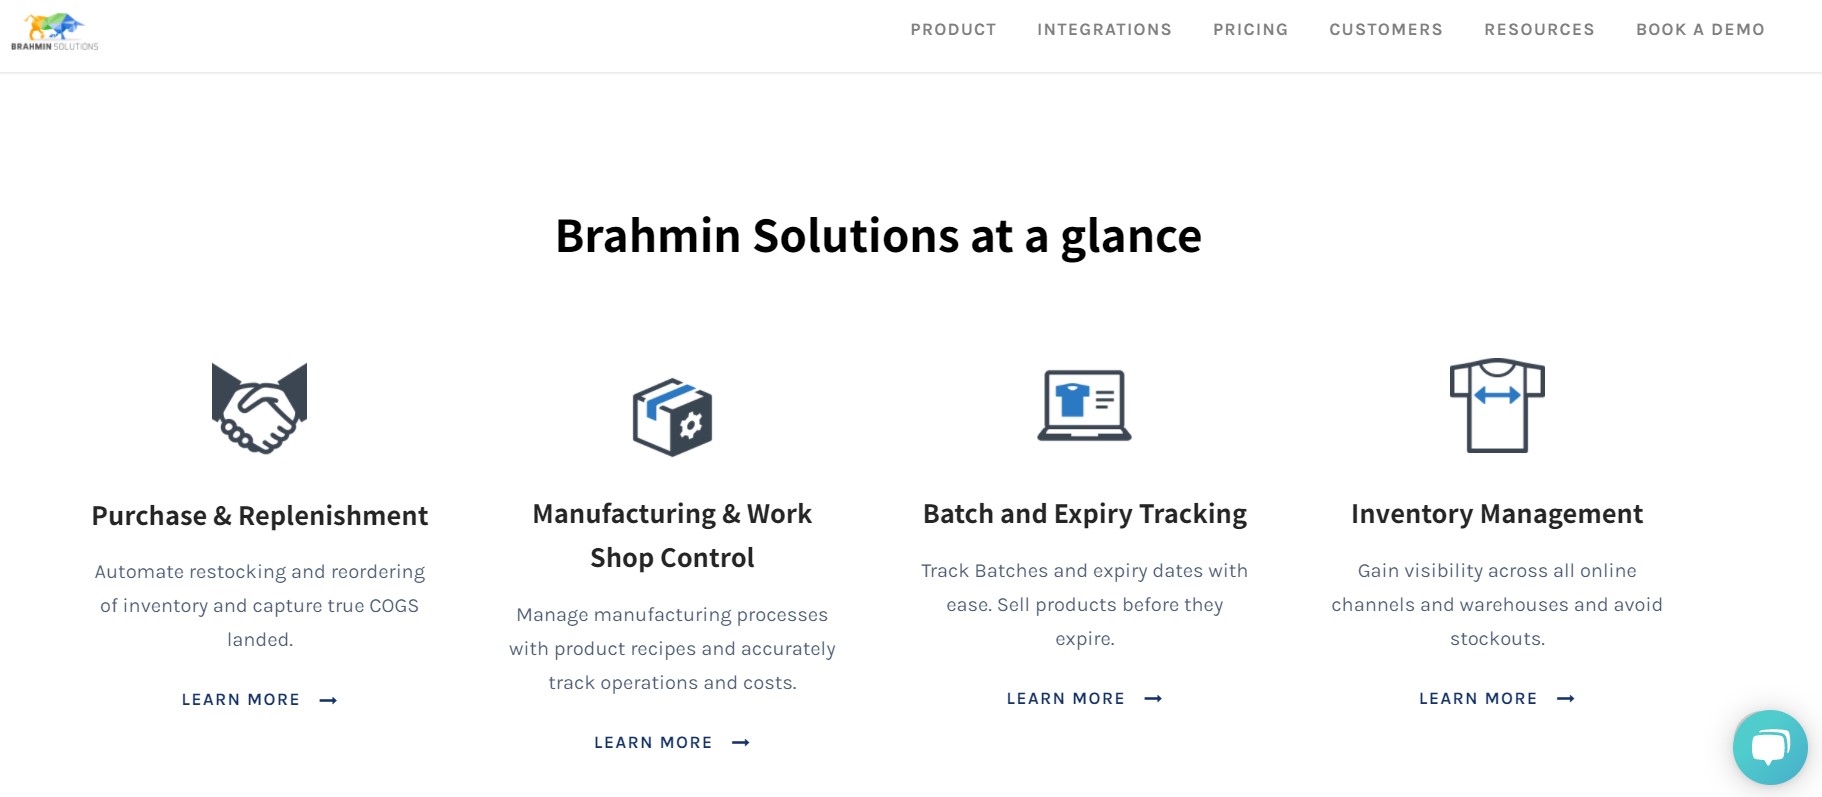 Find pricing, reviews and other details about Brahmin Solutions